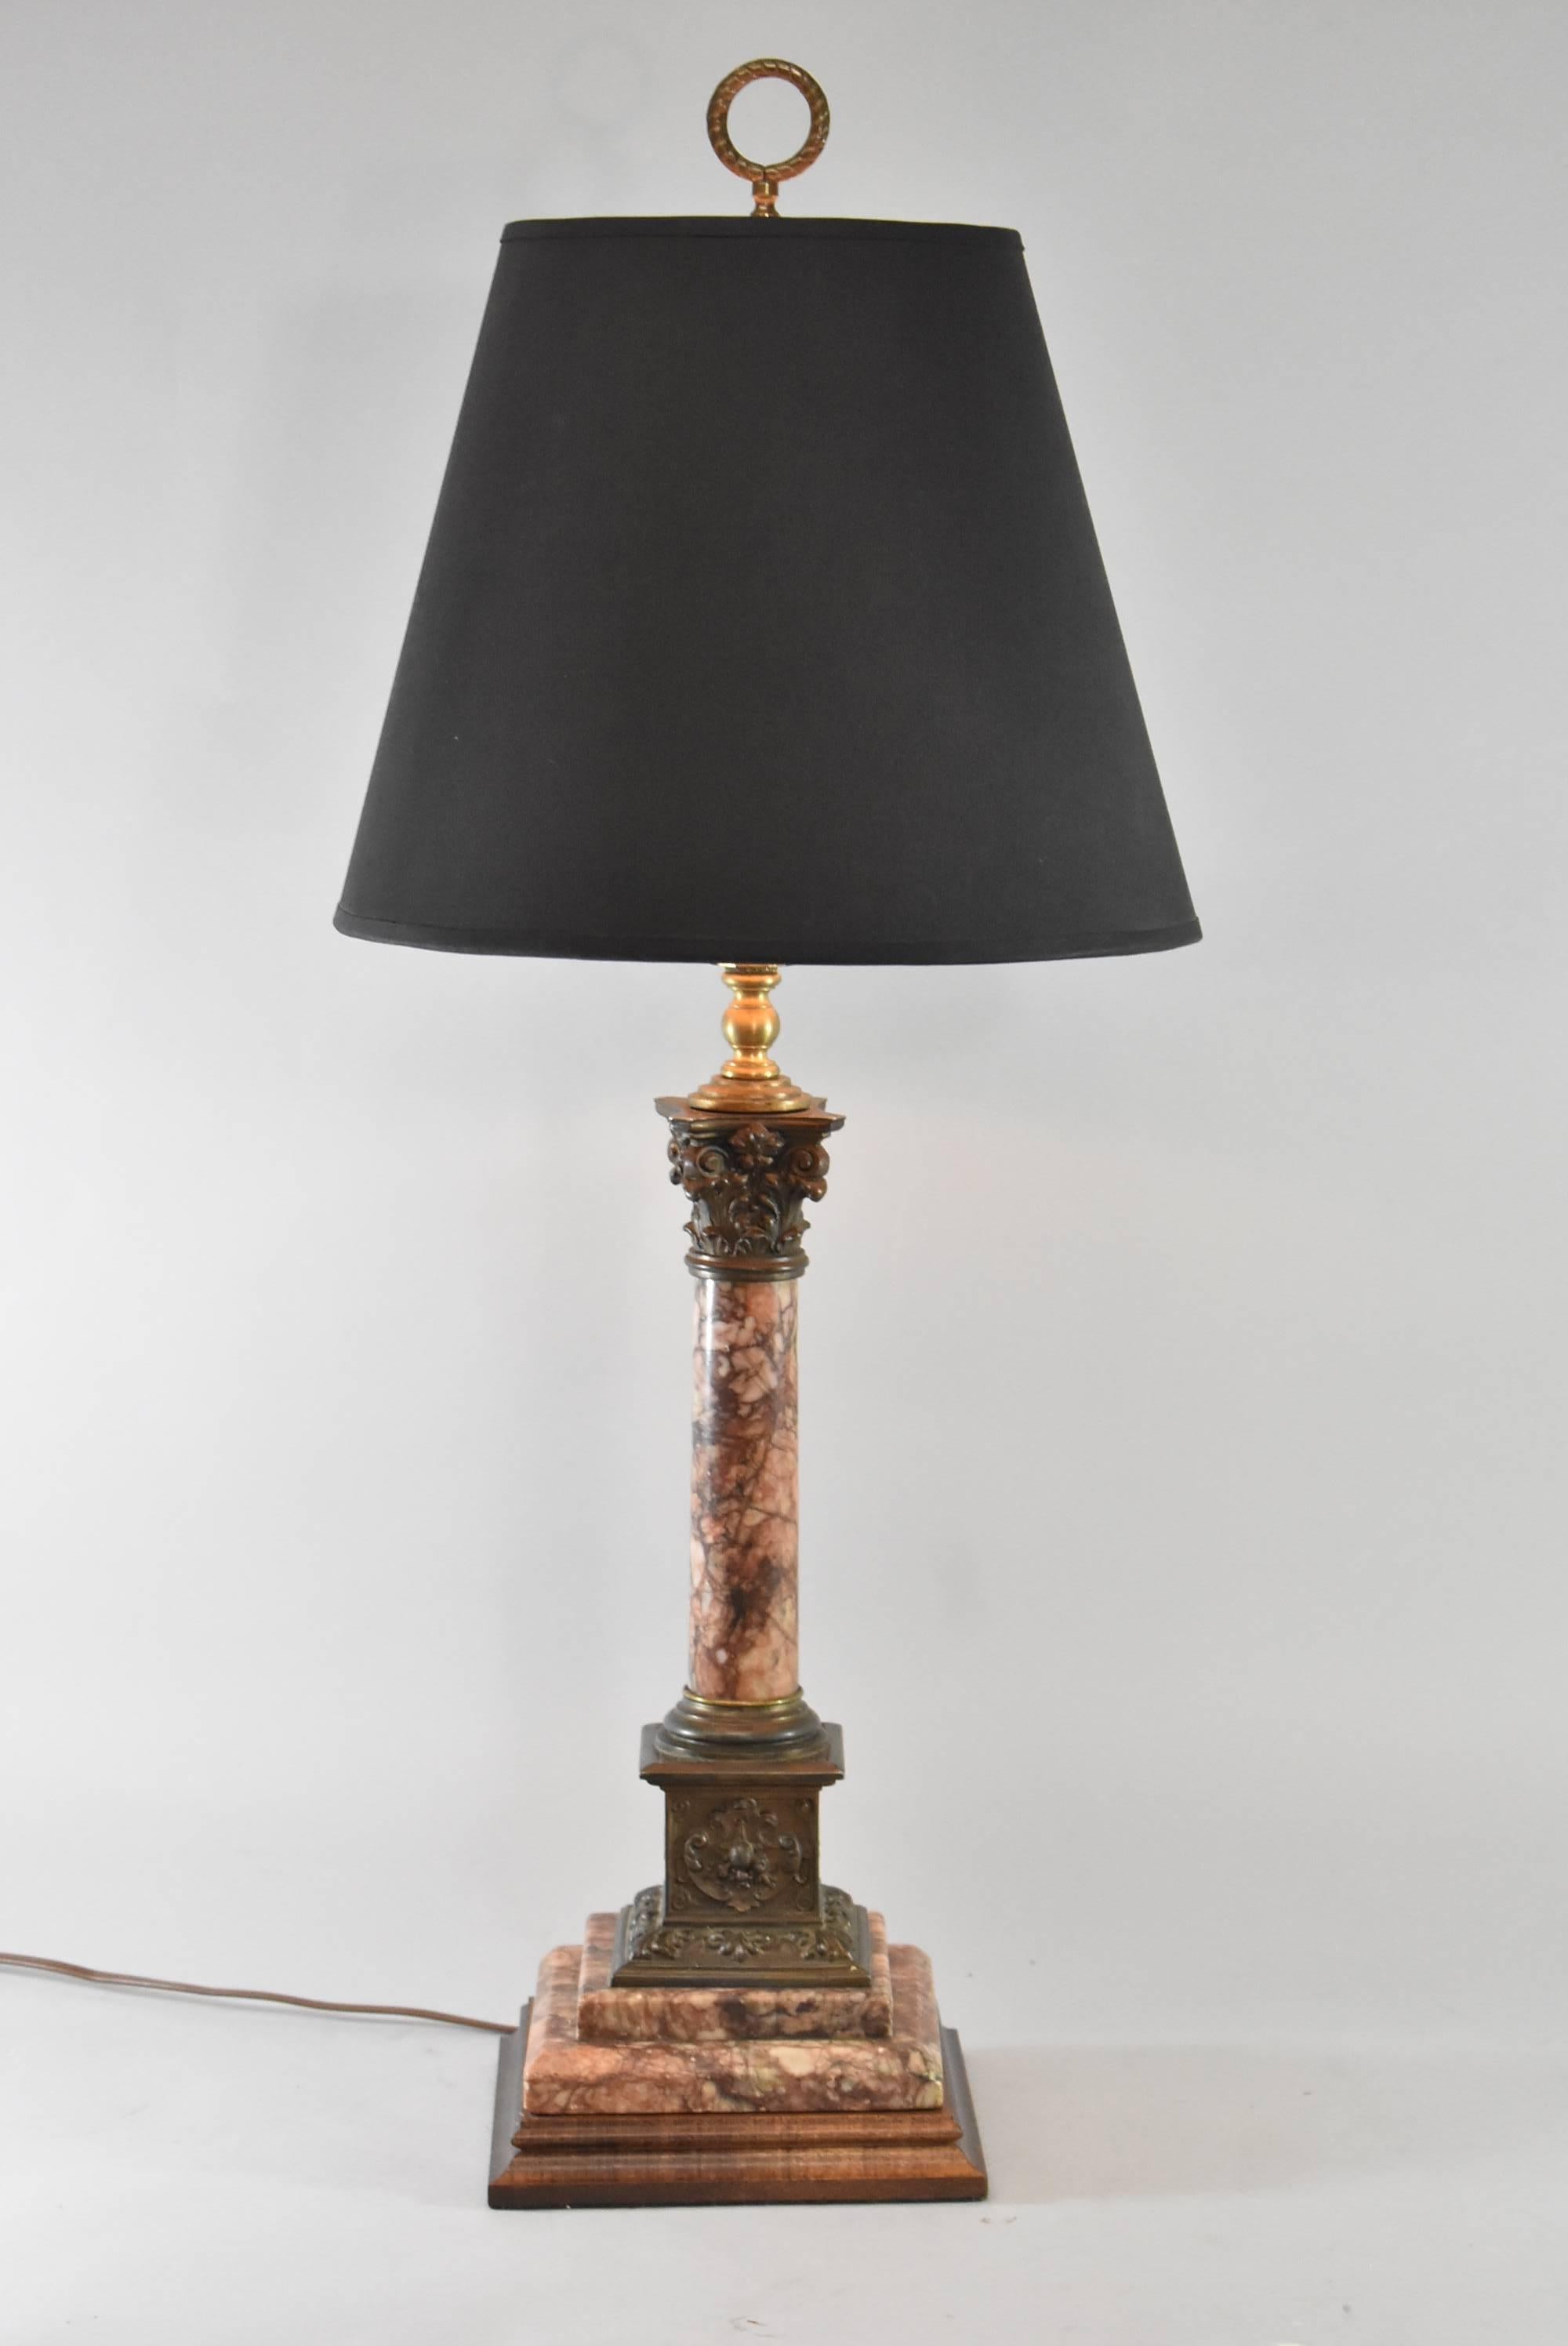 A beautiful marble table lamp. It features a lovely burgundy and grey marble in a pillar form with bronze scroll details and a wood base. Very good condition. The dimensions are 30.25